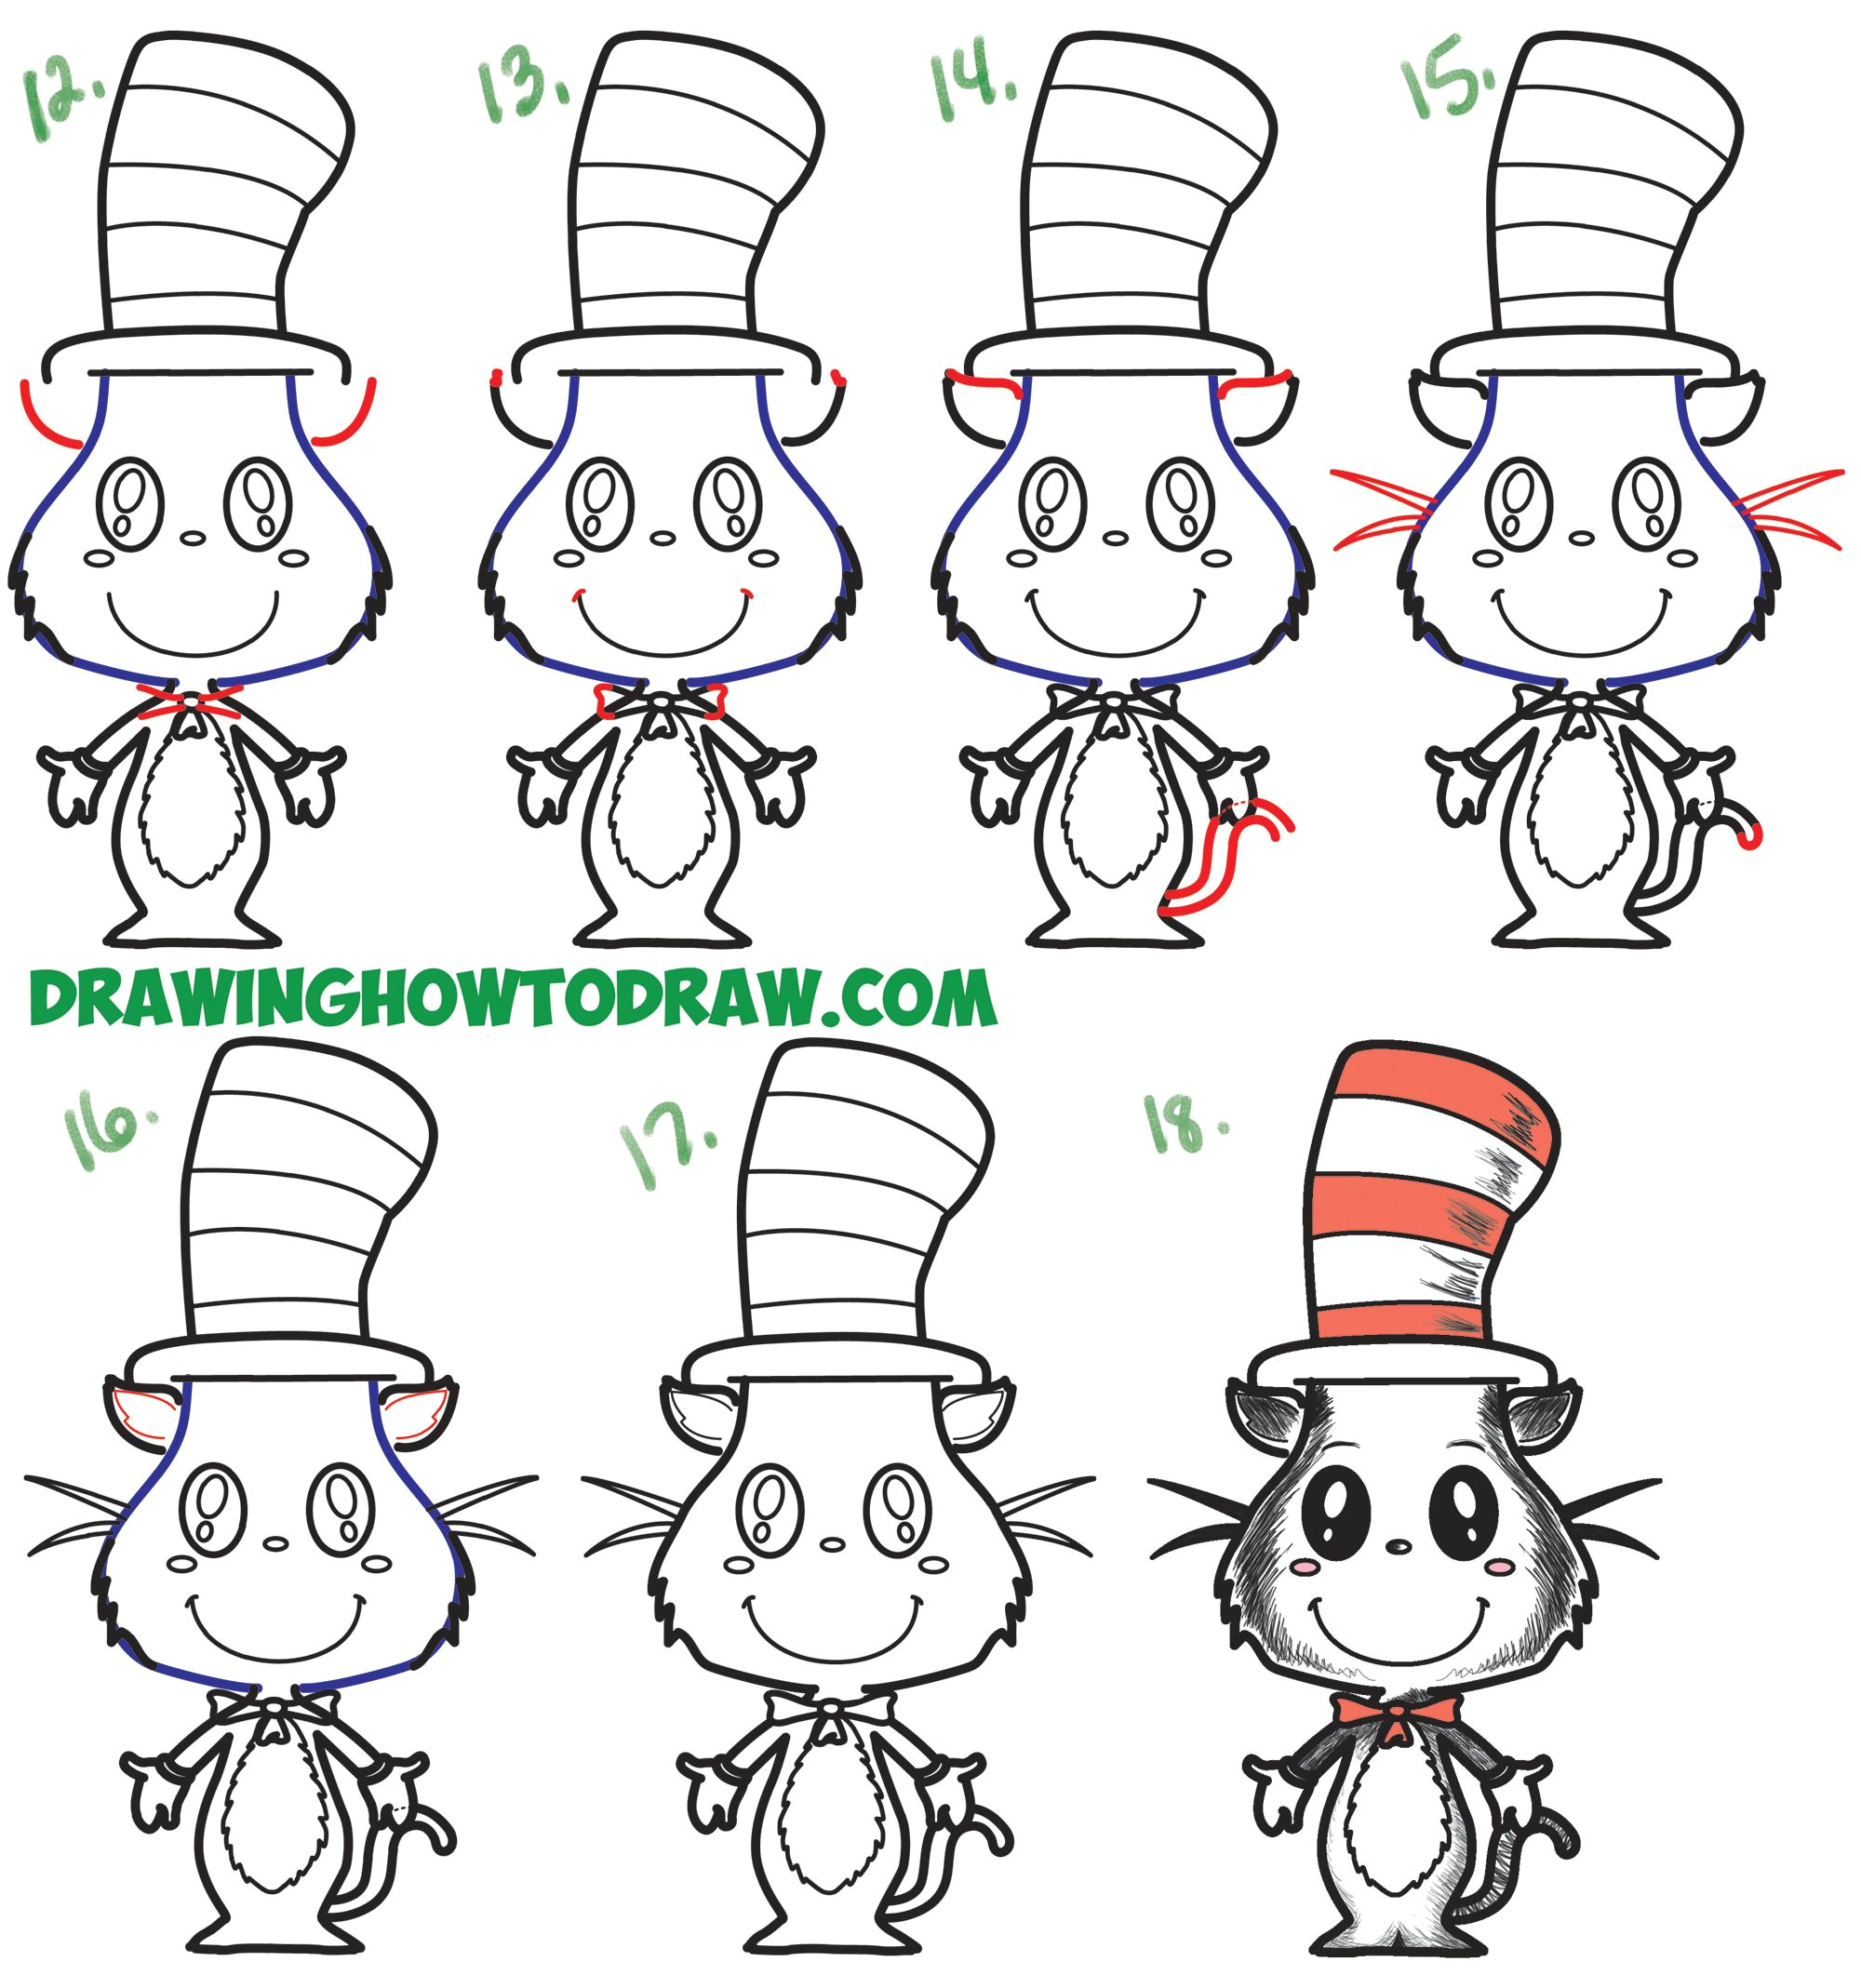 Drawing Ideas Easy Cute Step by Step How to Draw the Cat In the Hat Cute Kawaii Chibi Version Easy